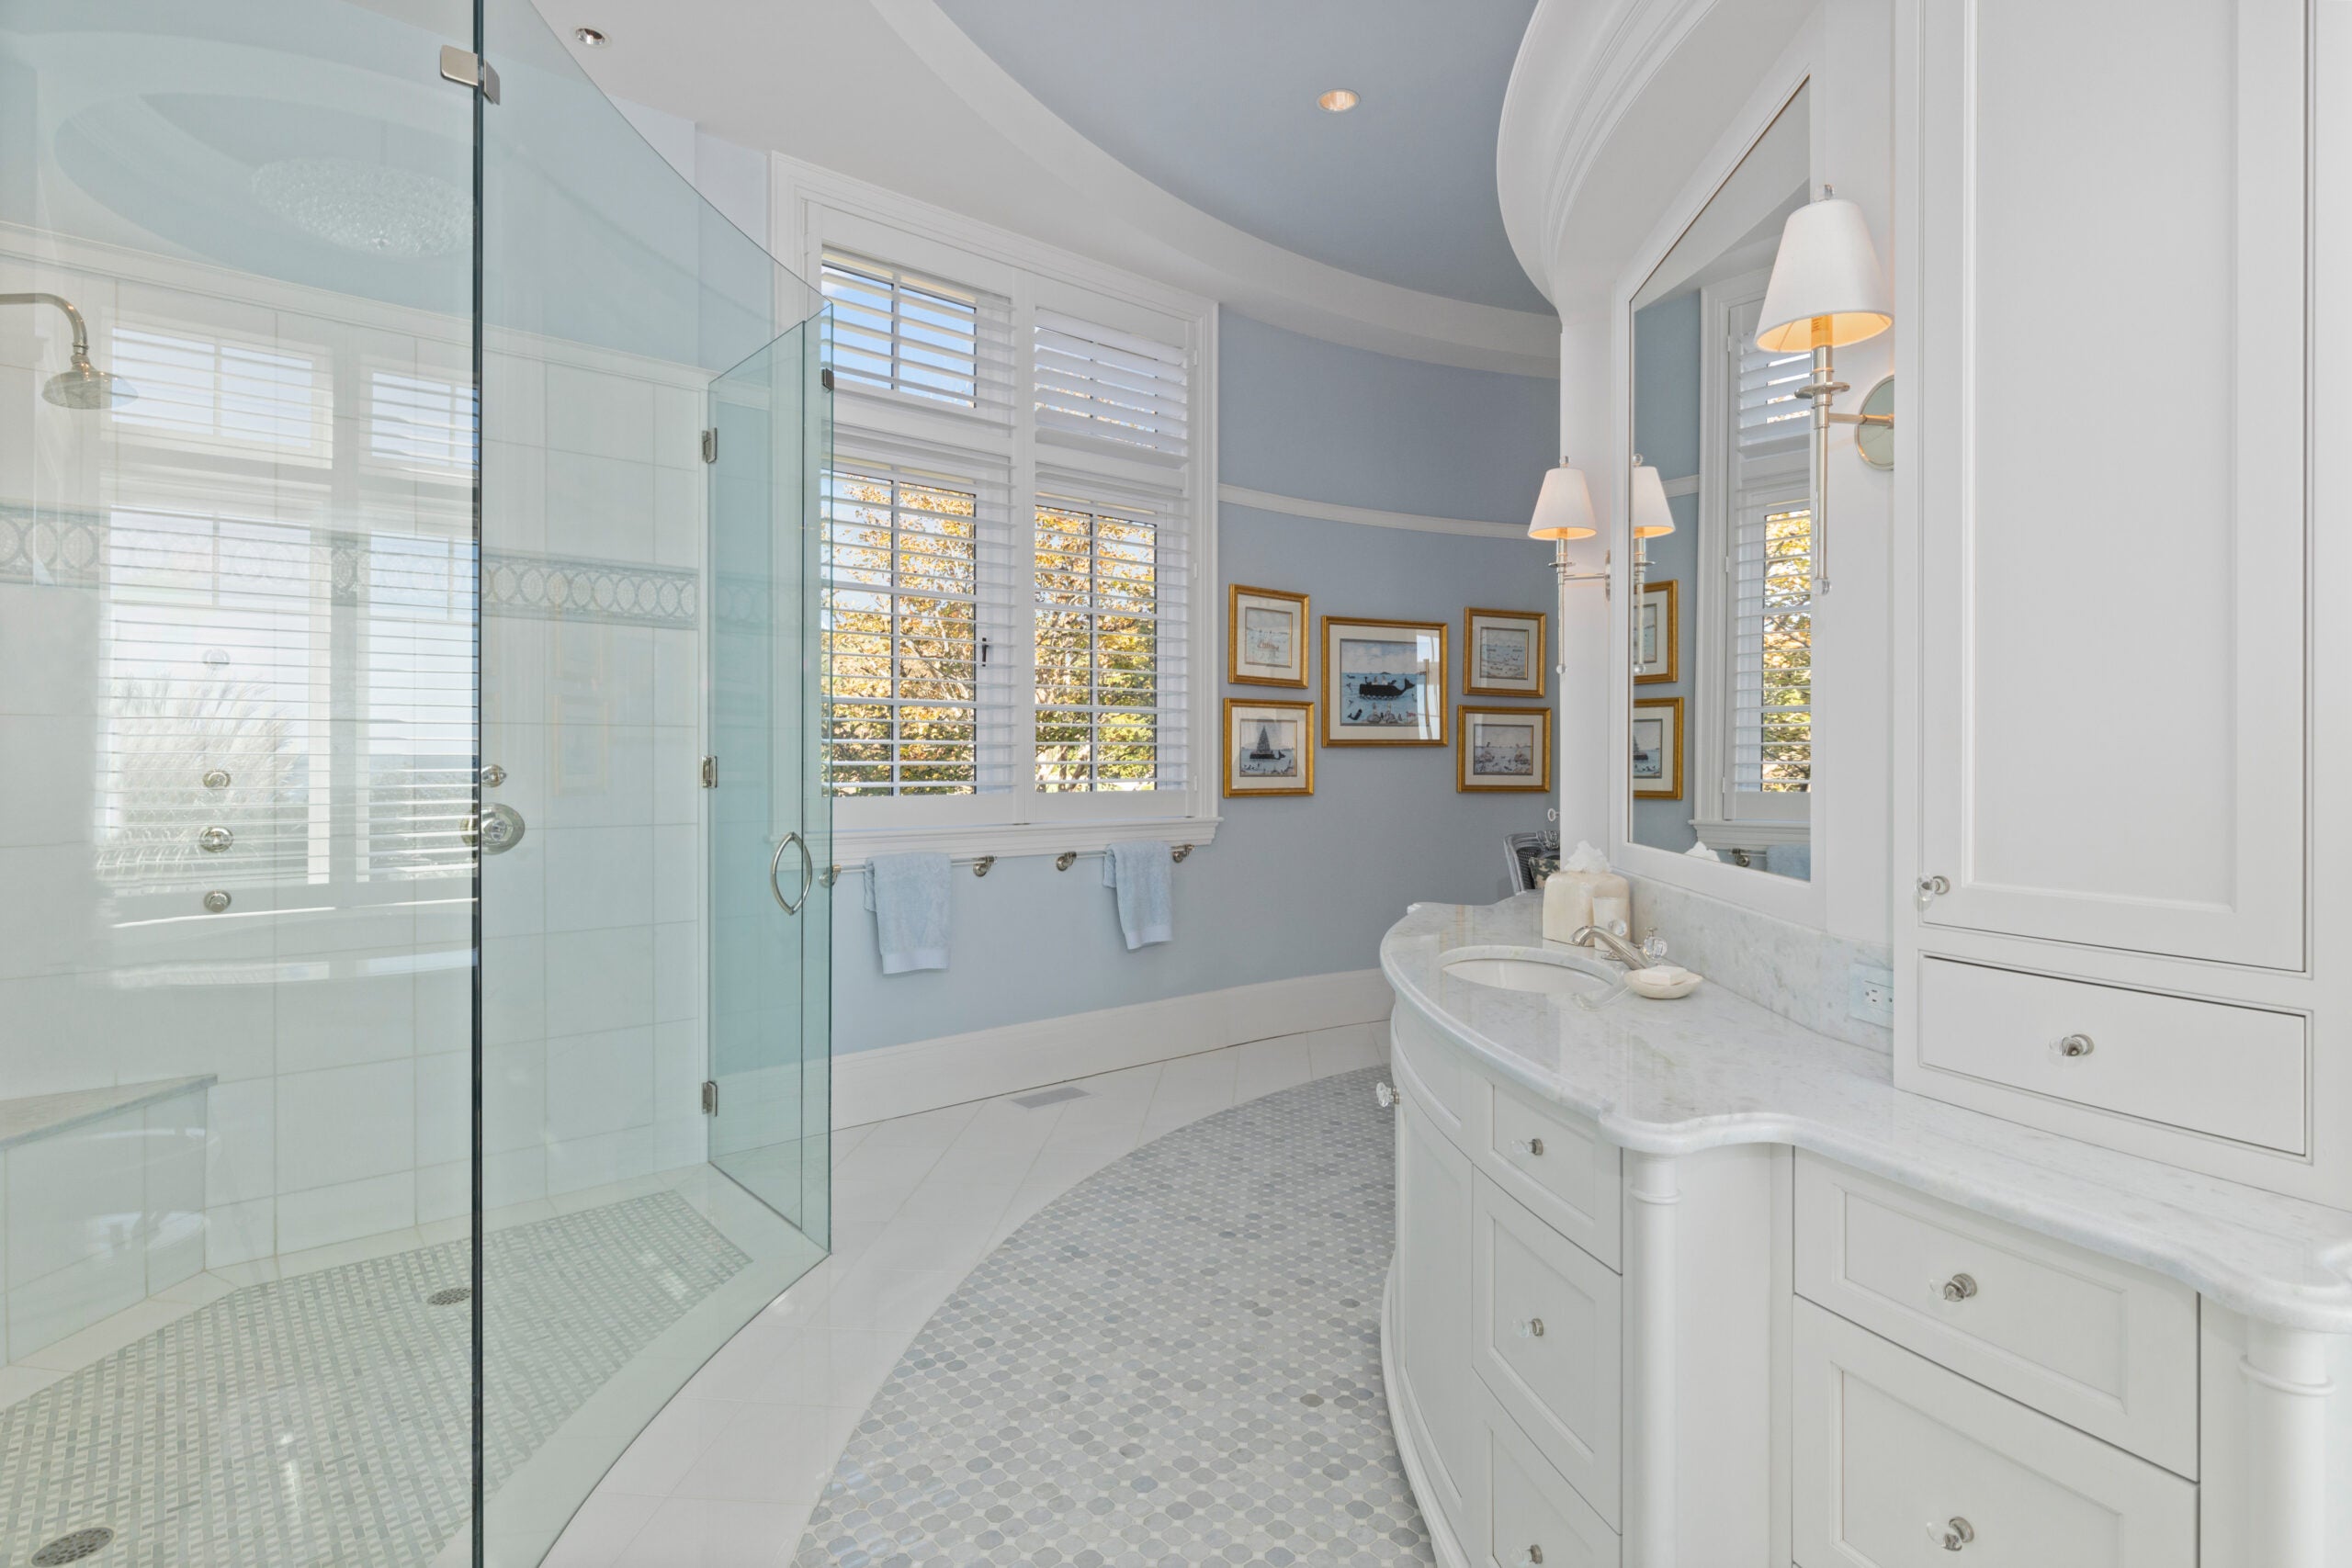 A curvy bathroom with white cabinetry, a frameless glass shower, and blue walls. A pair of windows floods the space with light. A small overall sink in a marble-veined vanity is visible. The walls are blue and lined with gold-framed pictures. The flooring is a mix of marble tile and small gray circular tile.